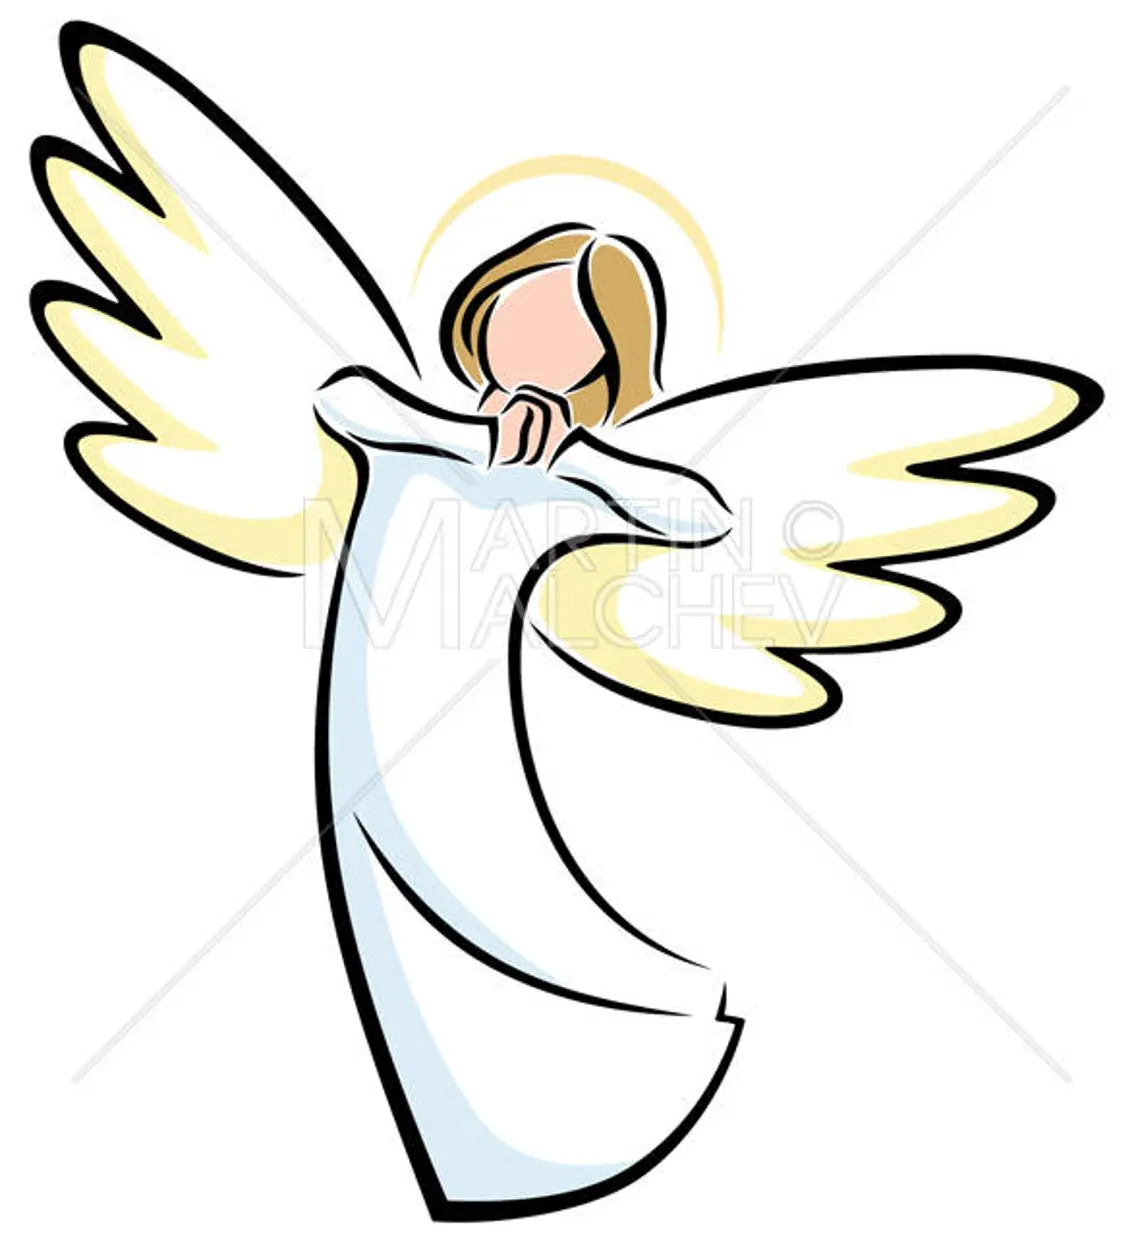 A wonderful image of an angel with wings.